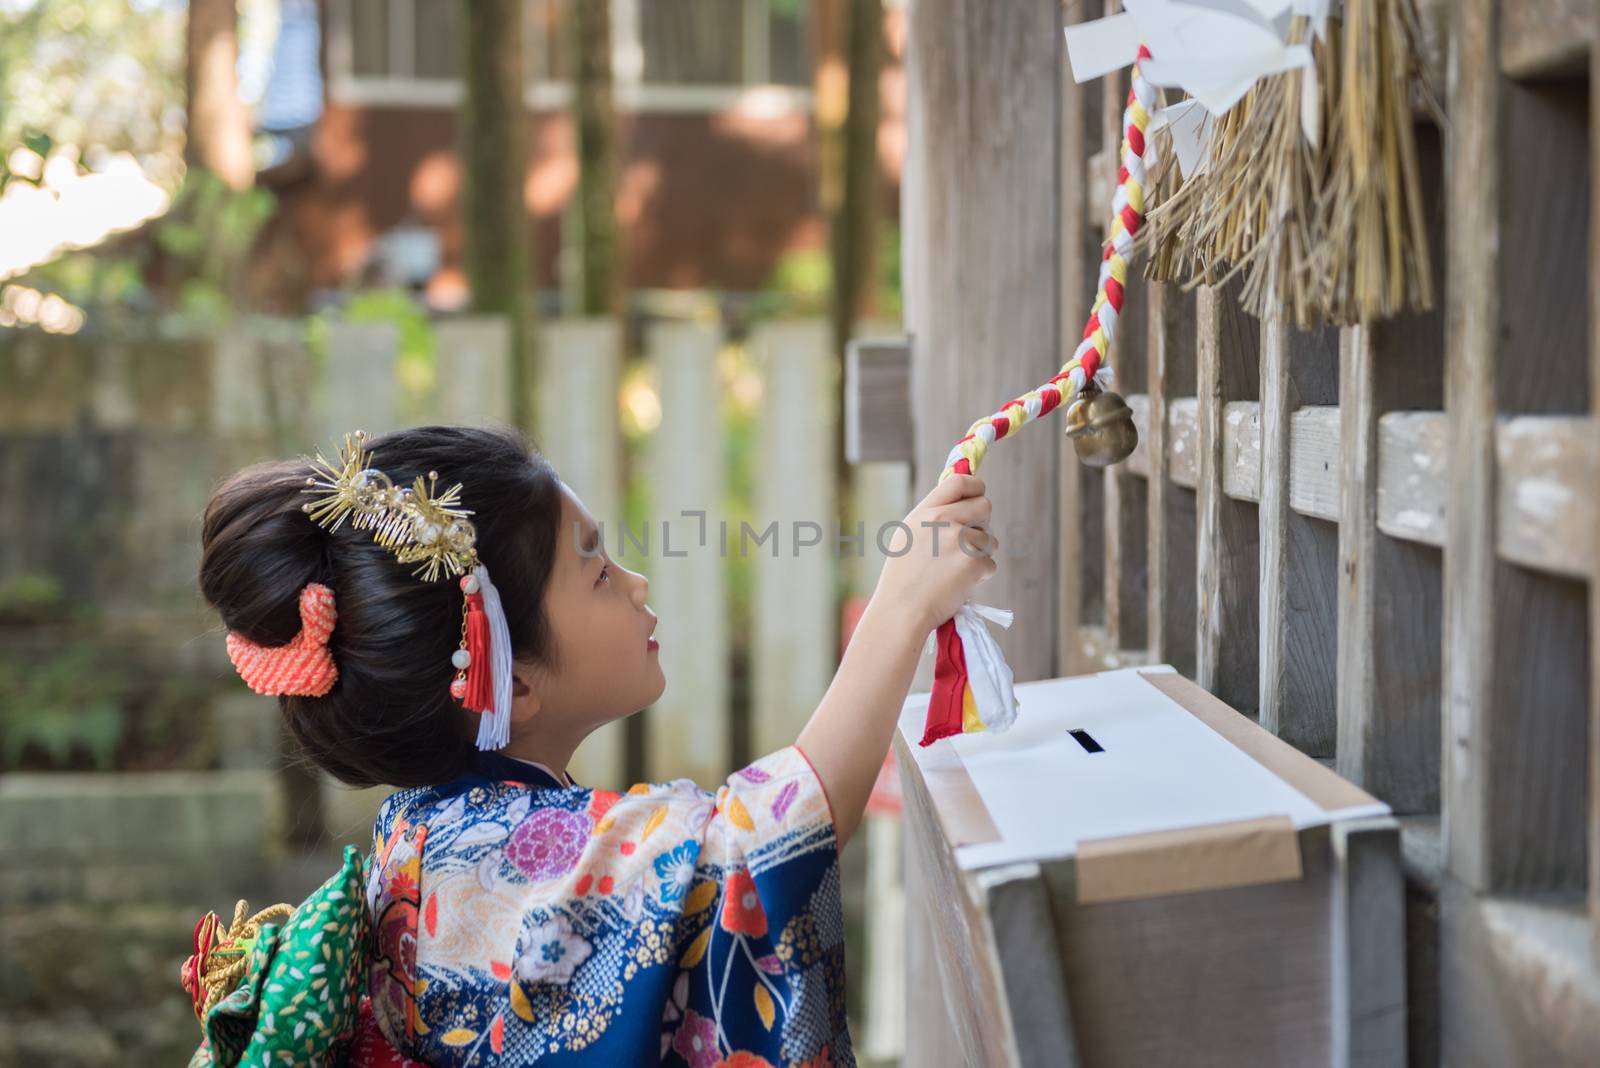 A young Japanese girl in a kimono outdoors at a shrine ringing a bell